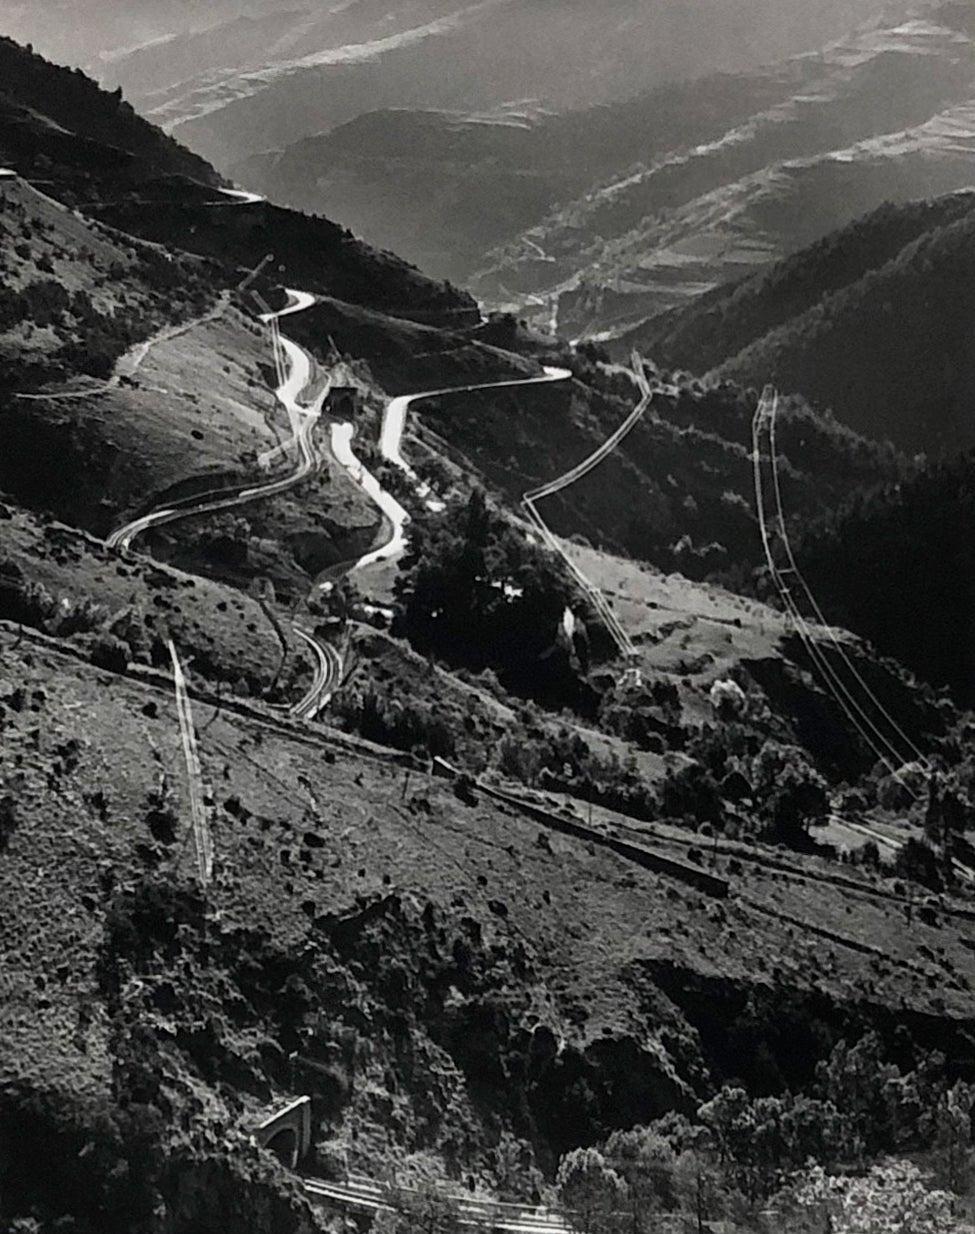 Aerial view of Mountains and Roads 1950, by Martin Munkacsi
Silver gelatin print
Image size: 11.7 in. H x 9 in. W
Sheet size: 13.5 in. H x 10.5 in. W
Signed and dated in pencil on the verso

Unframed, unmatted. No Edition. Verso stamps: 